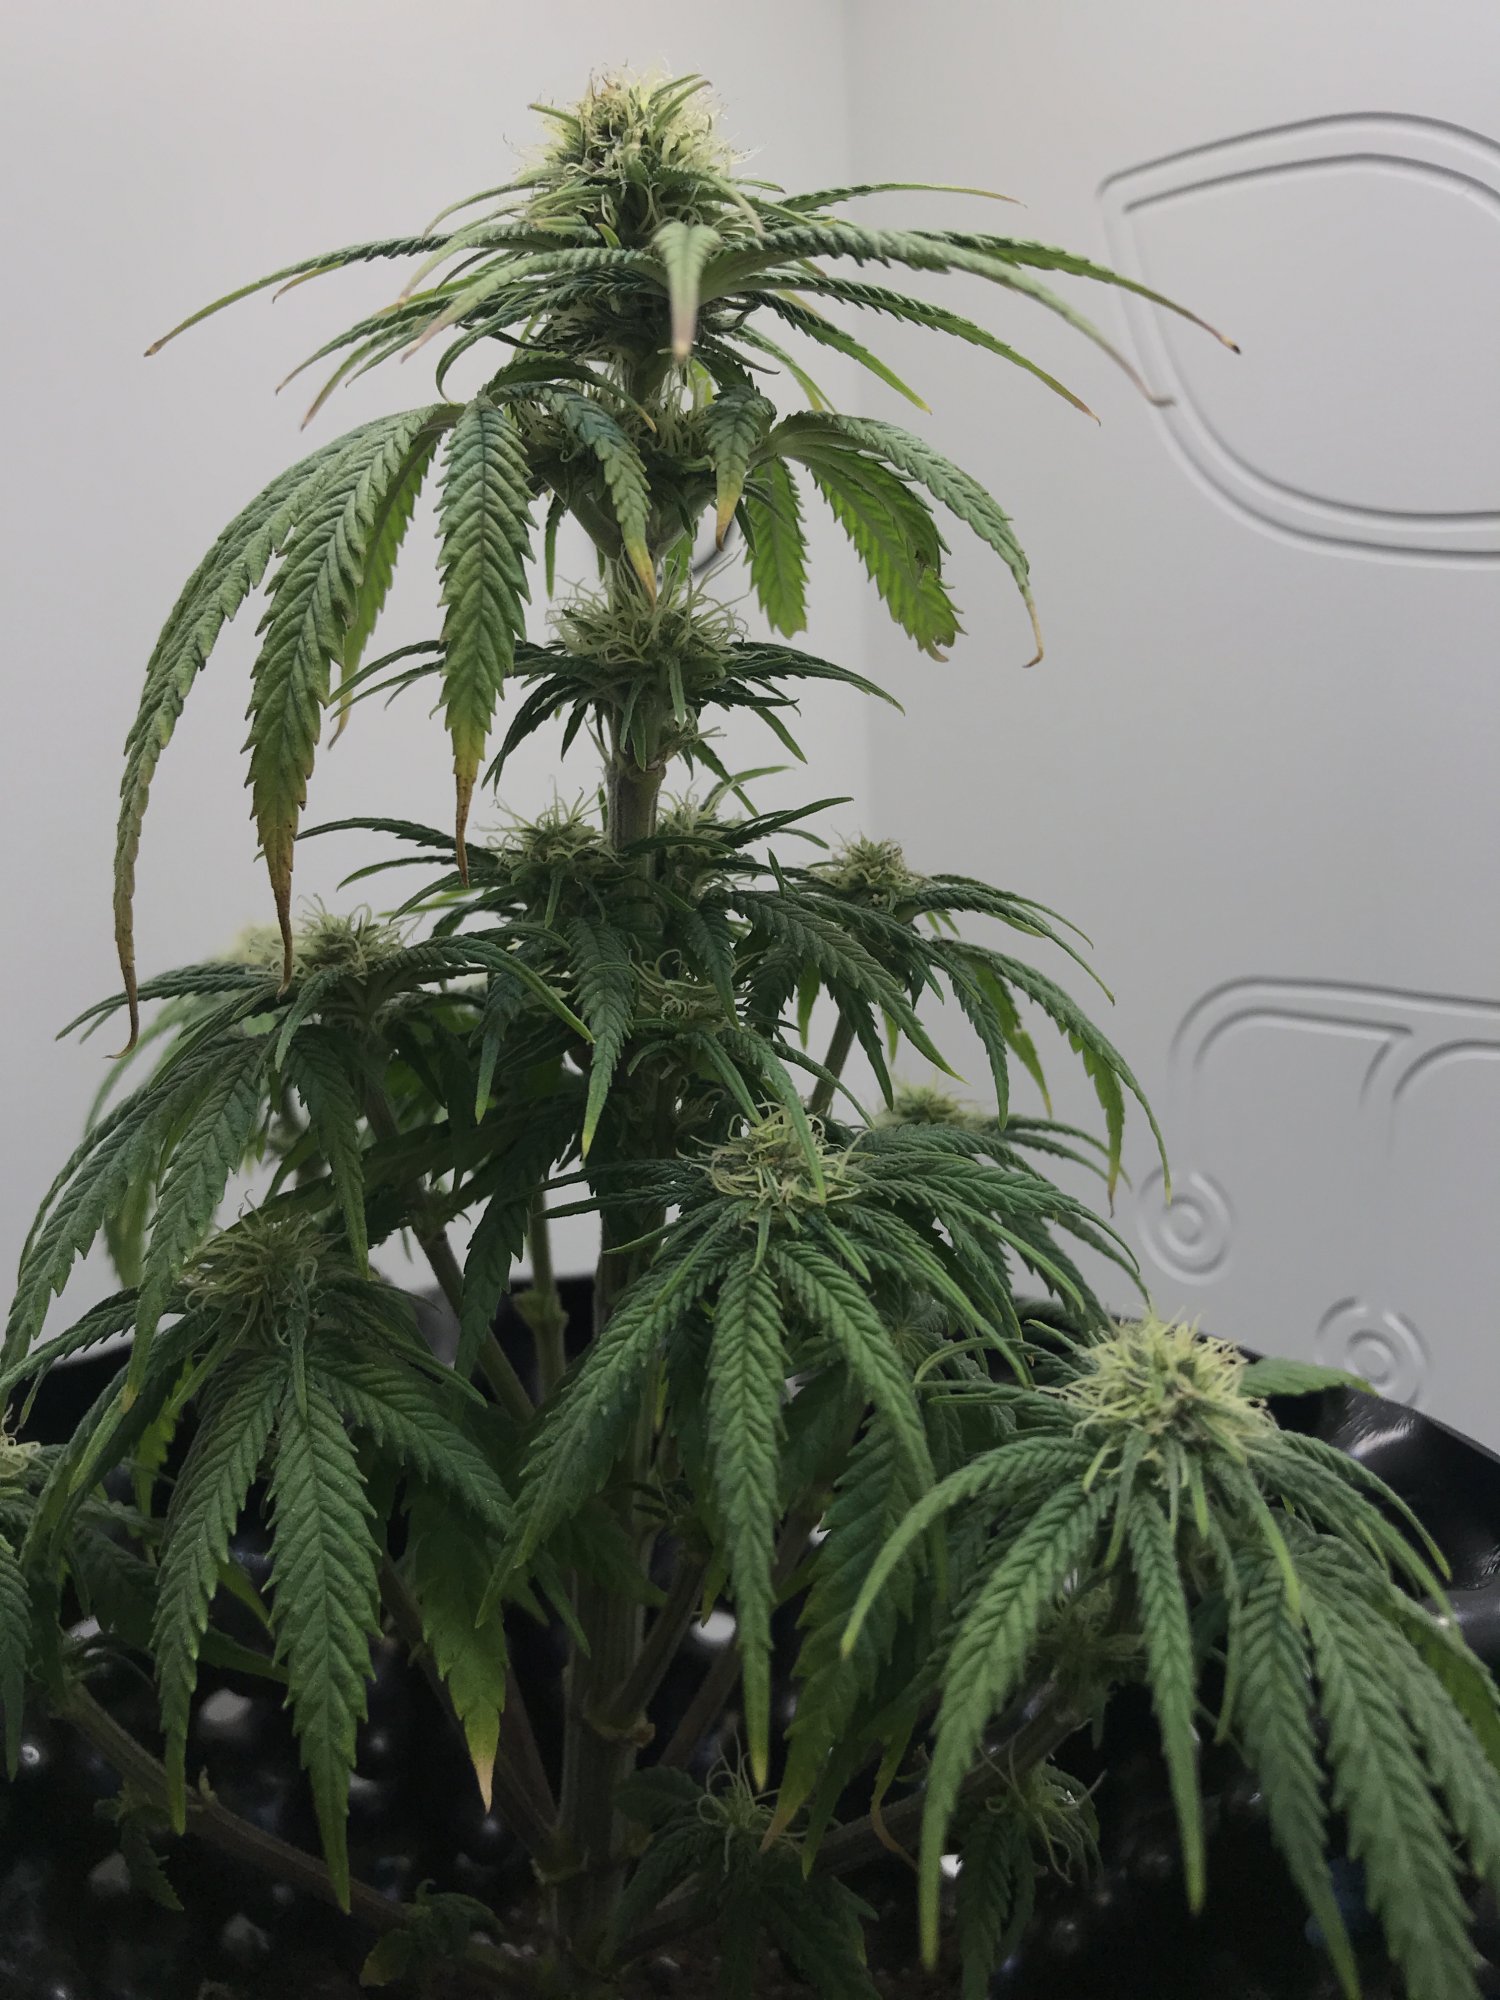 Is this a root issue nute deficiency or something else 4